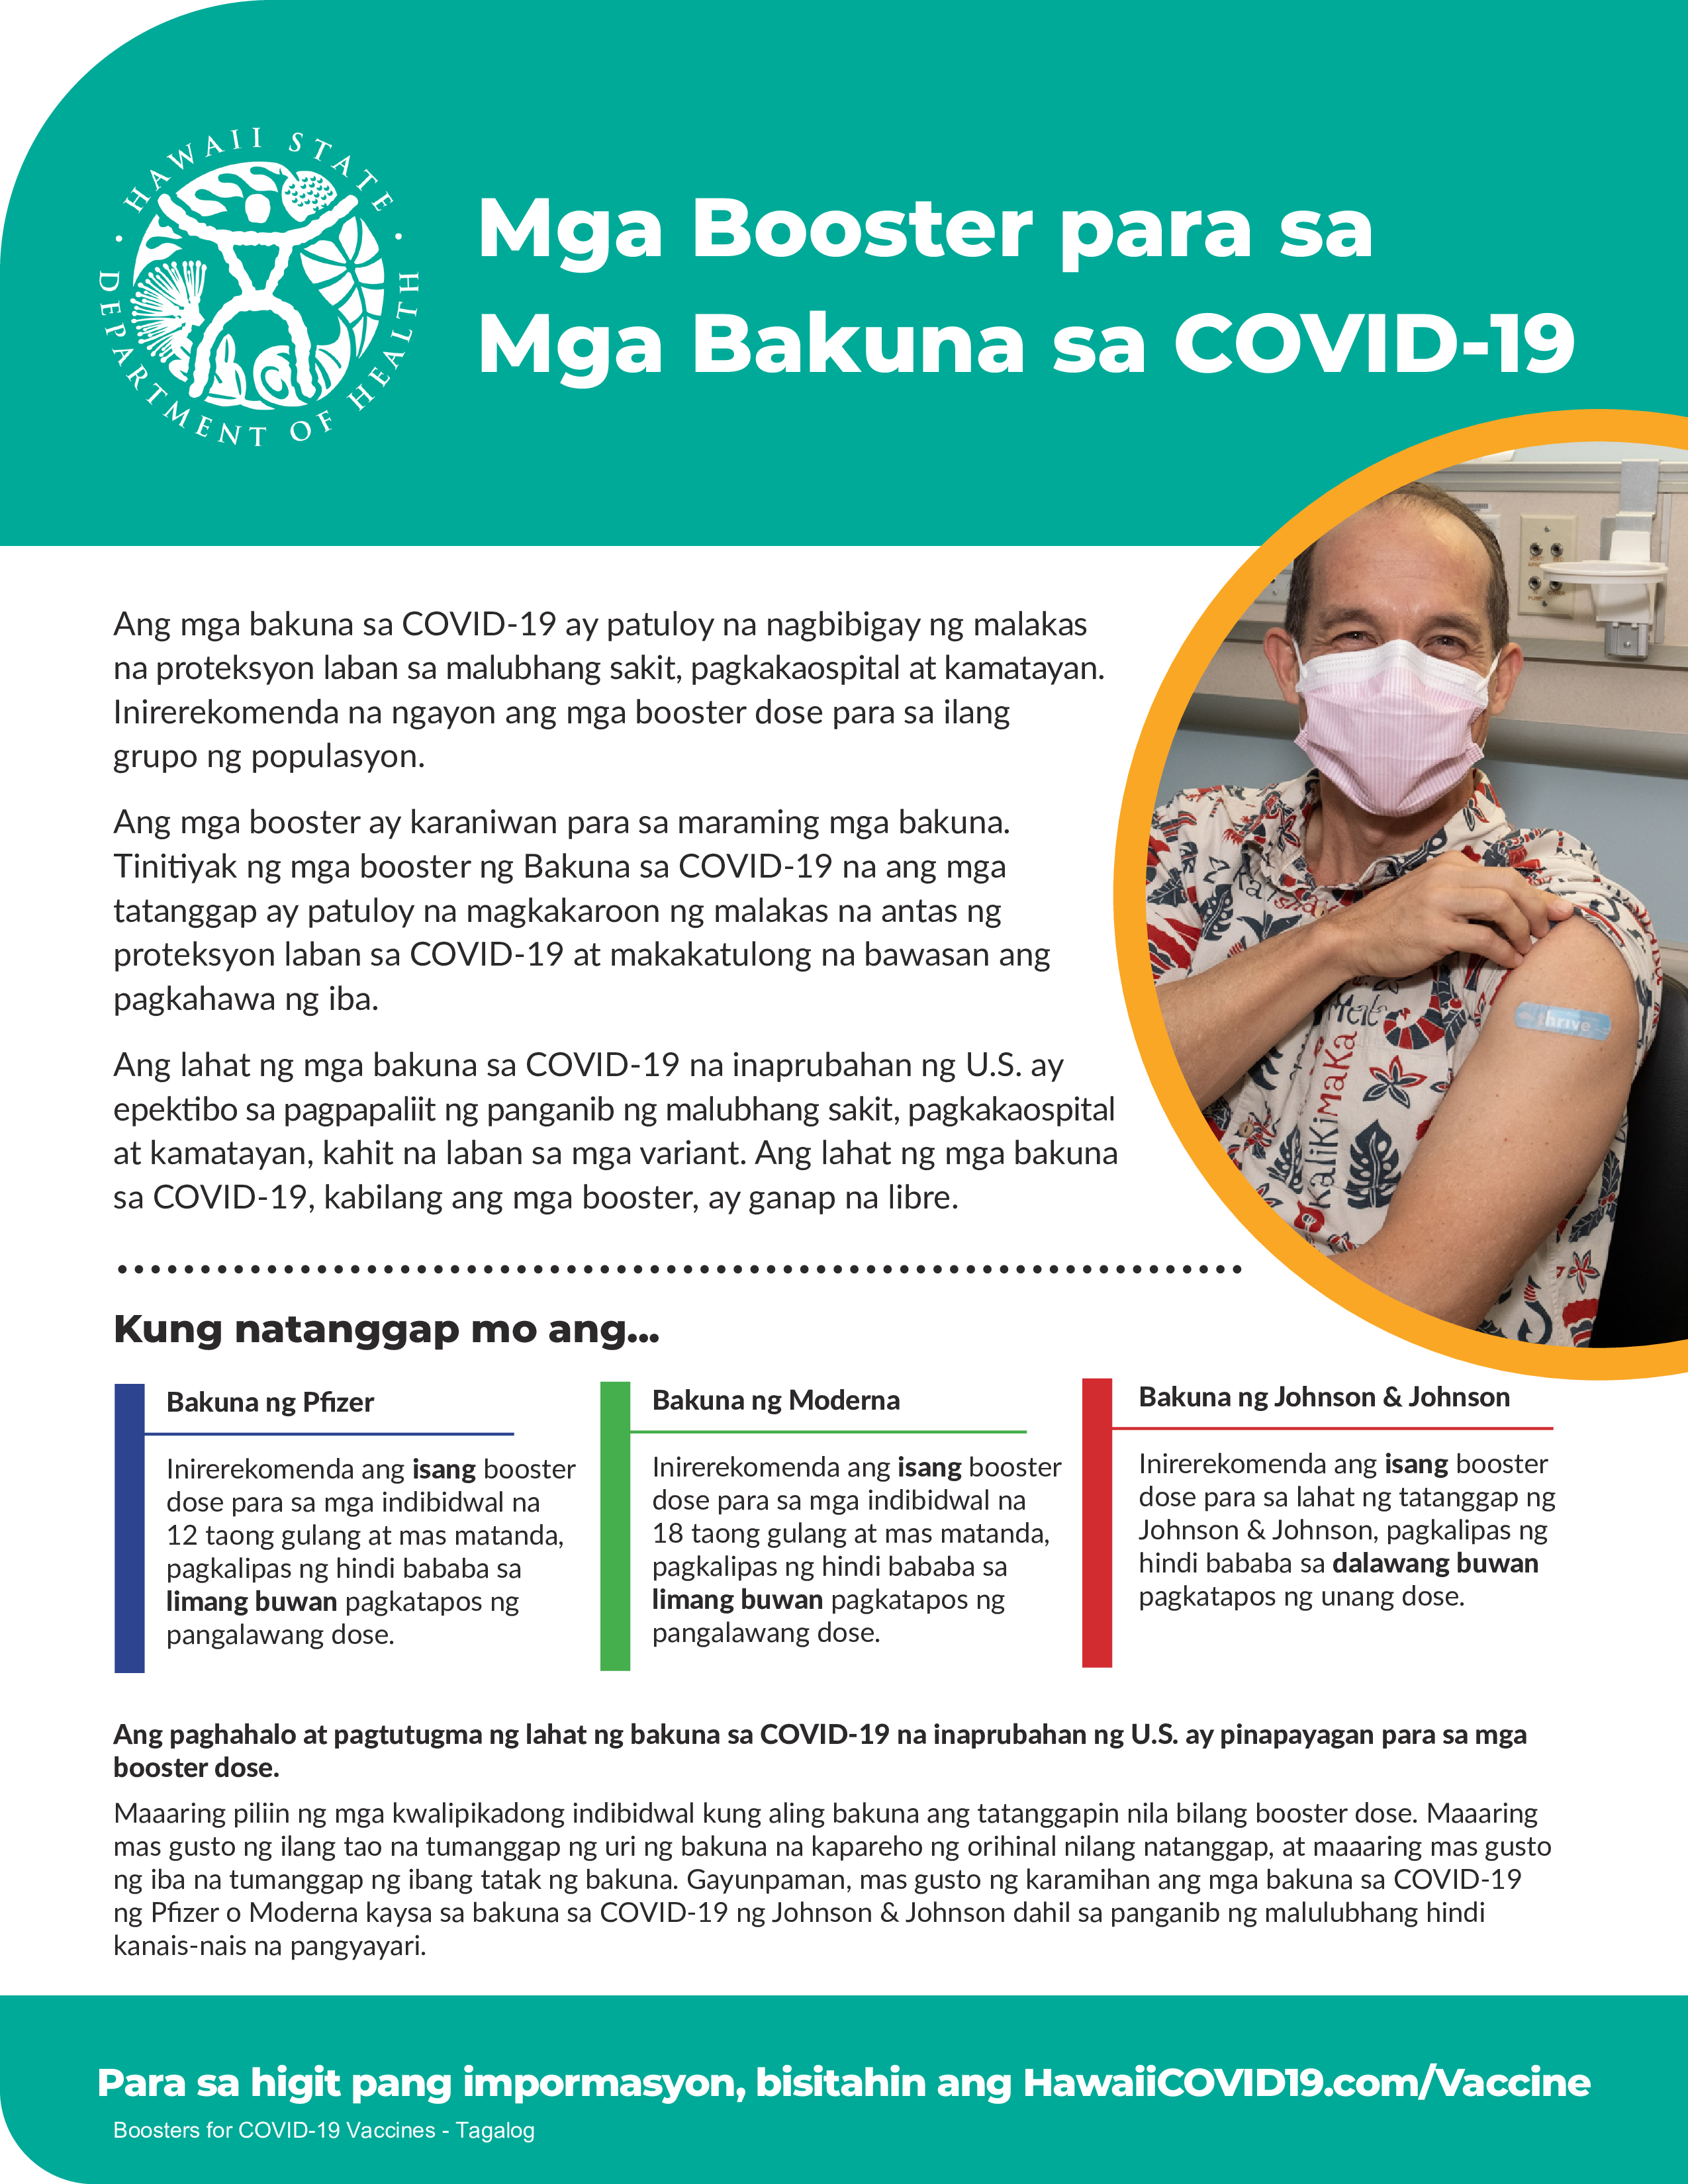 Booster factsheet in Tagalog.